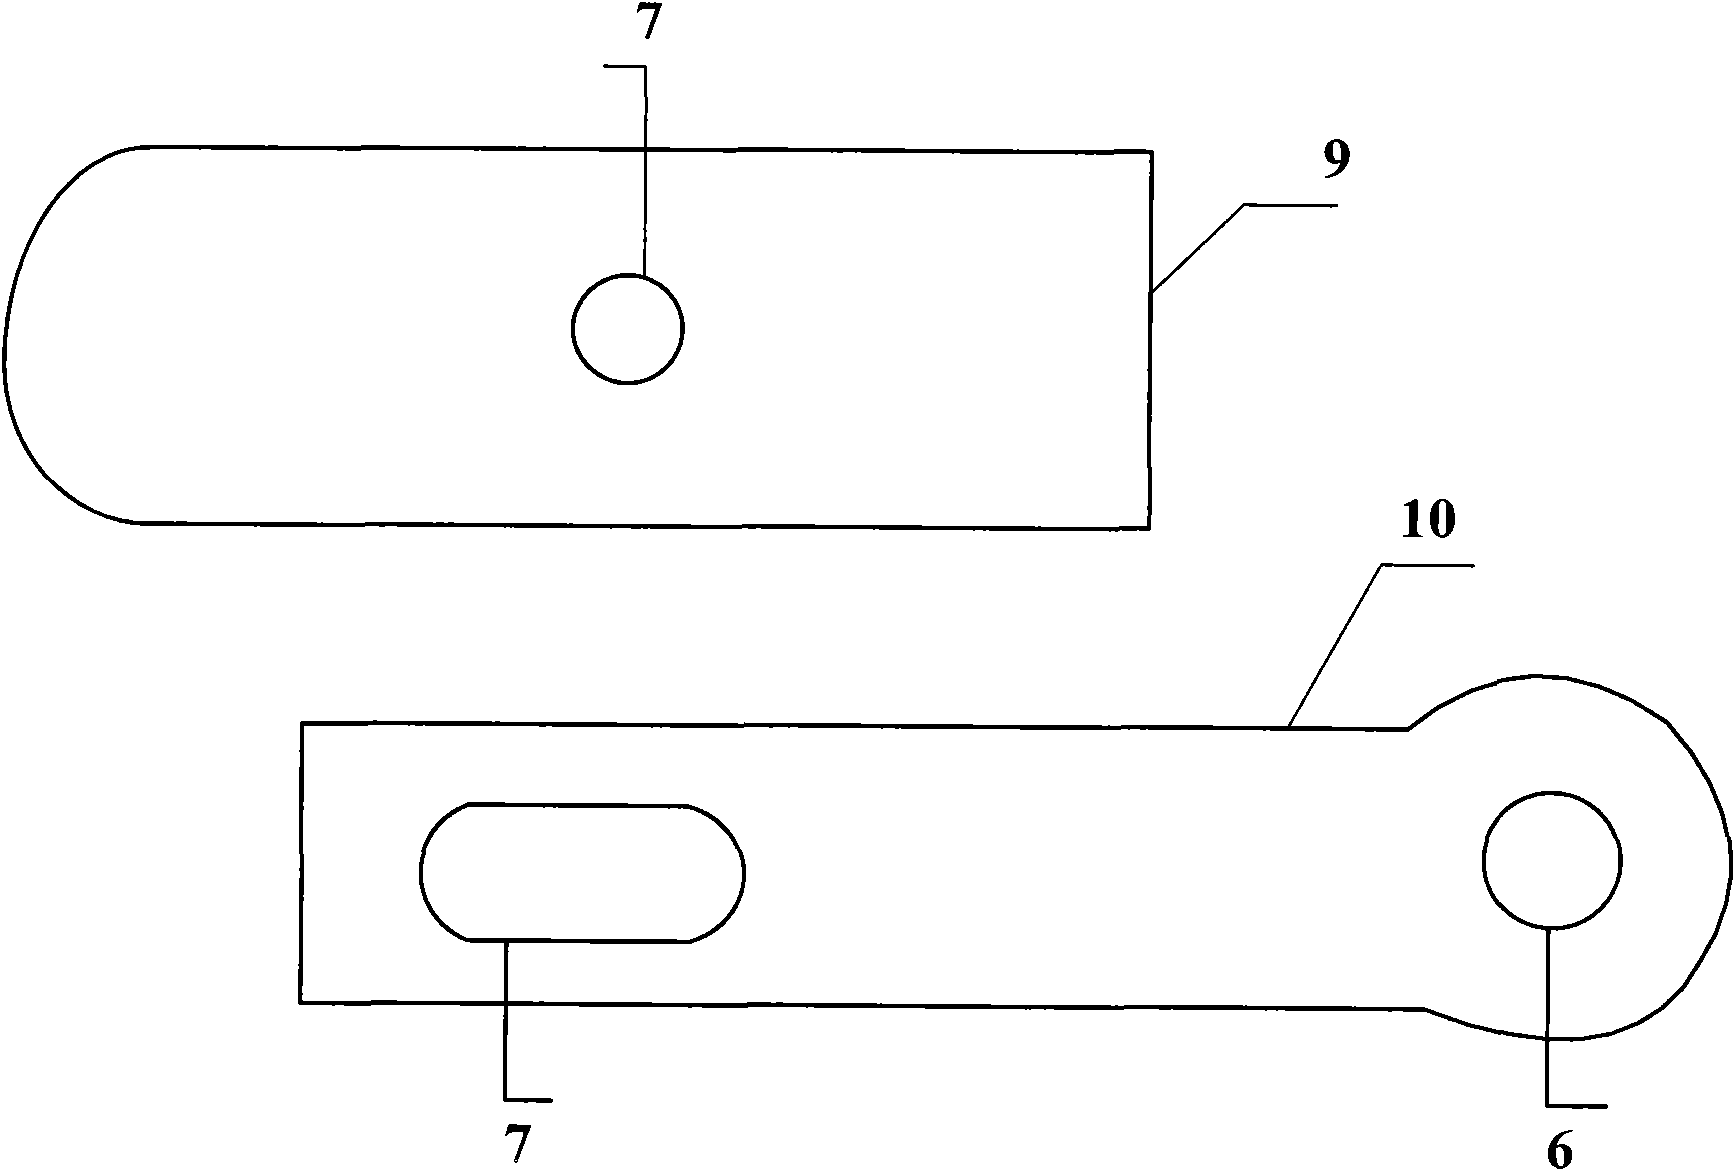 Foreign body intrusion signal acquisition device